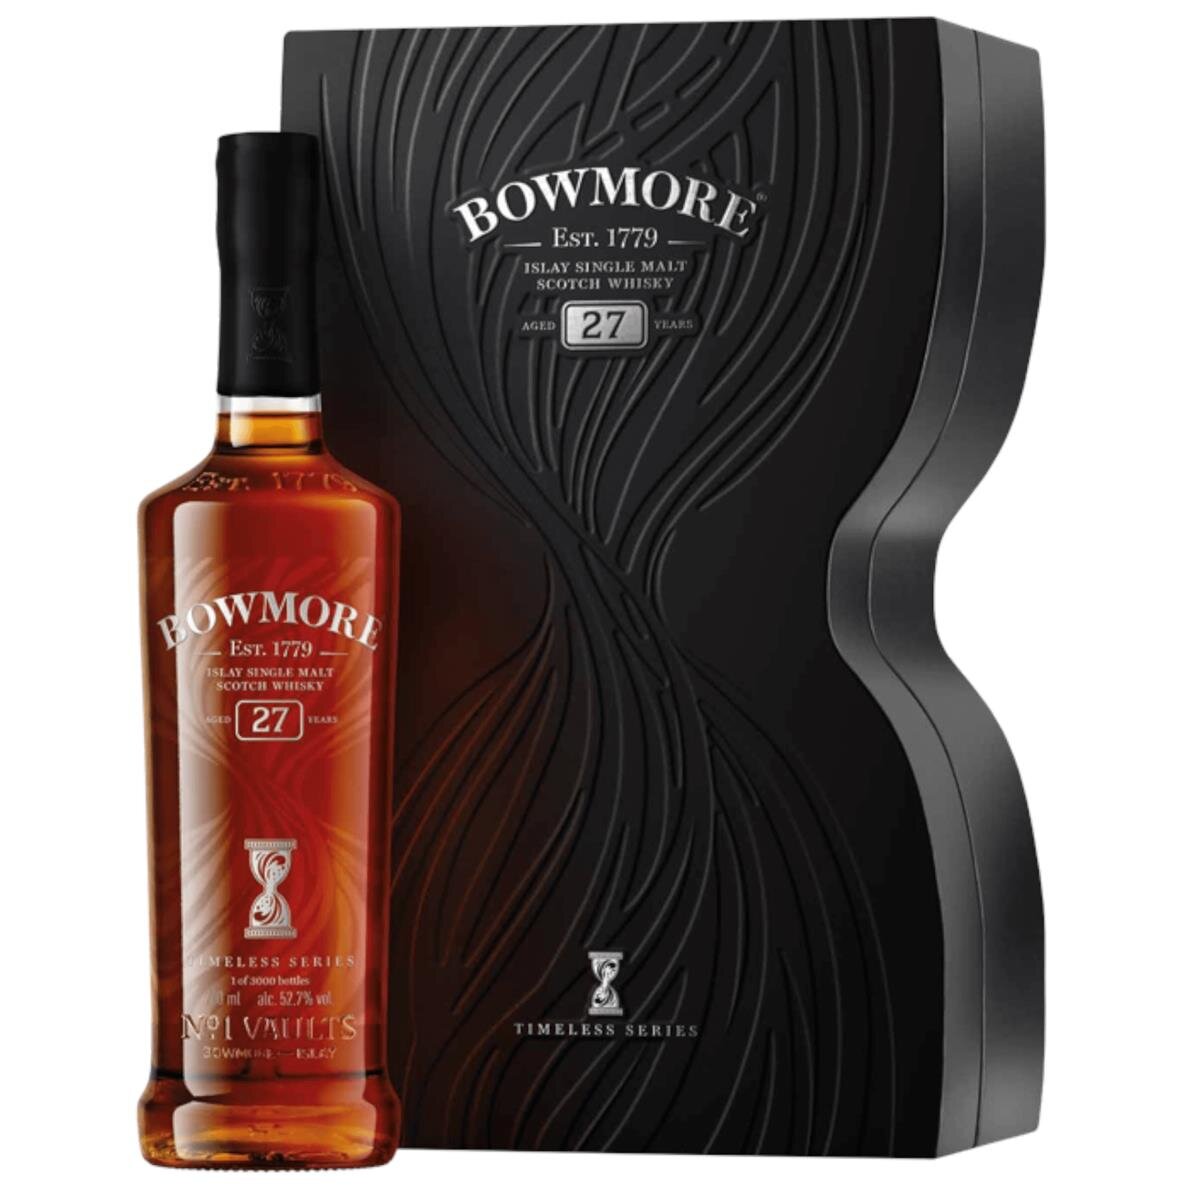 Bowmore 27 Years Timeless Series in 52,7% 0,7l Geschenkbo Vol. Whisky